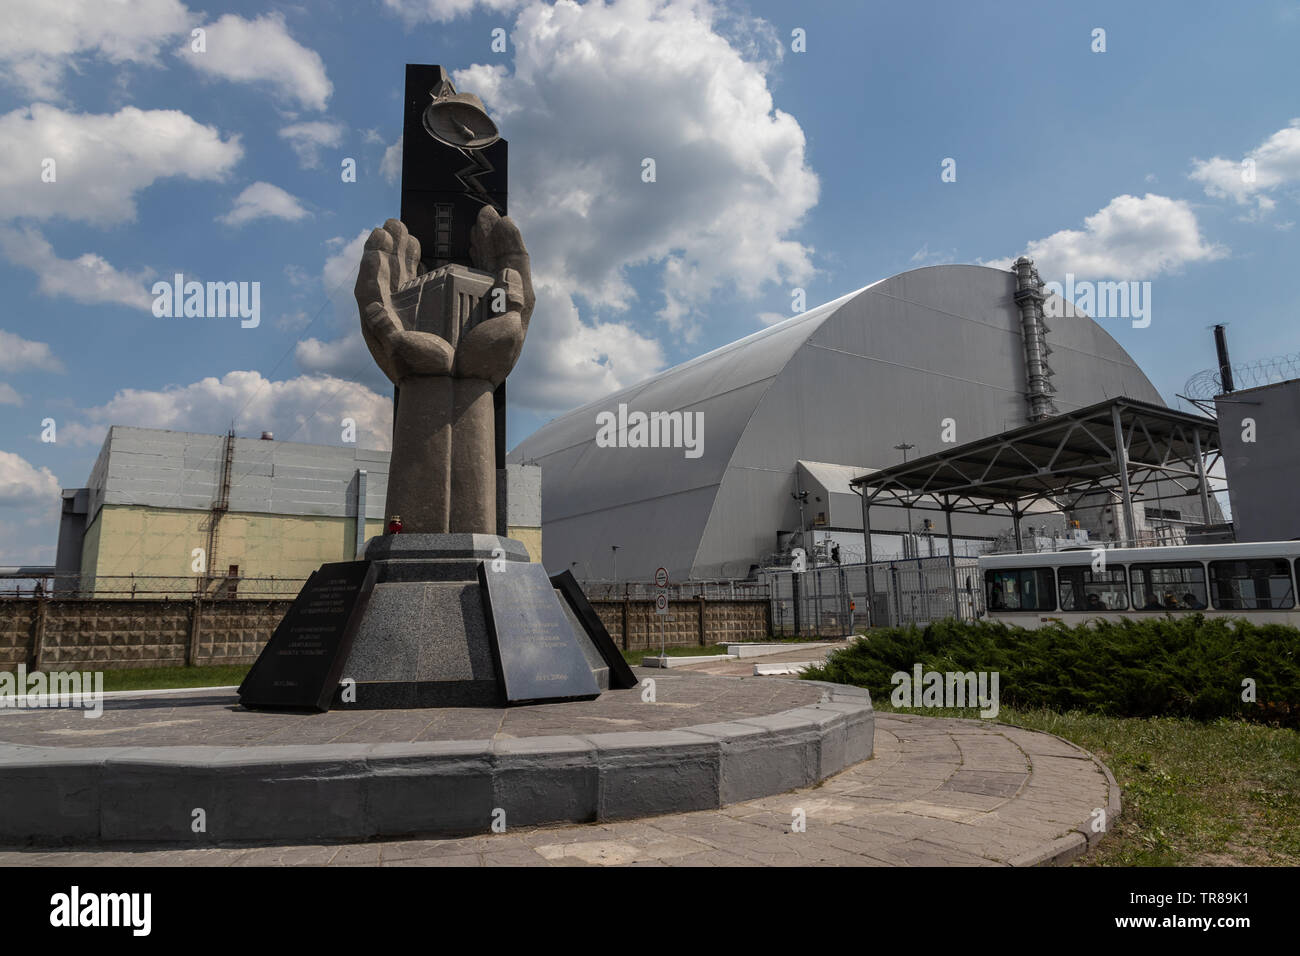 Monument to the Chernobyl Victims at Chernobyl Nuclear Power Plant, Reactor 4, Chernobyl exclusion zone, Ukraine Stock Photo